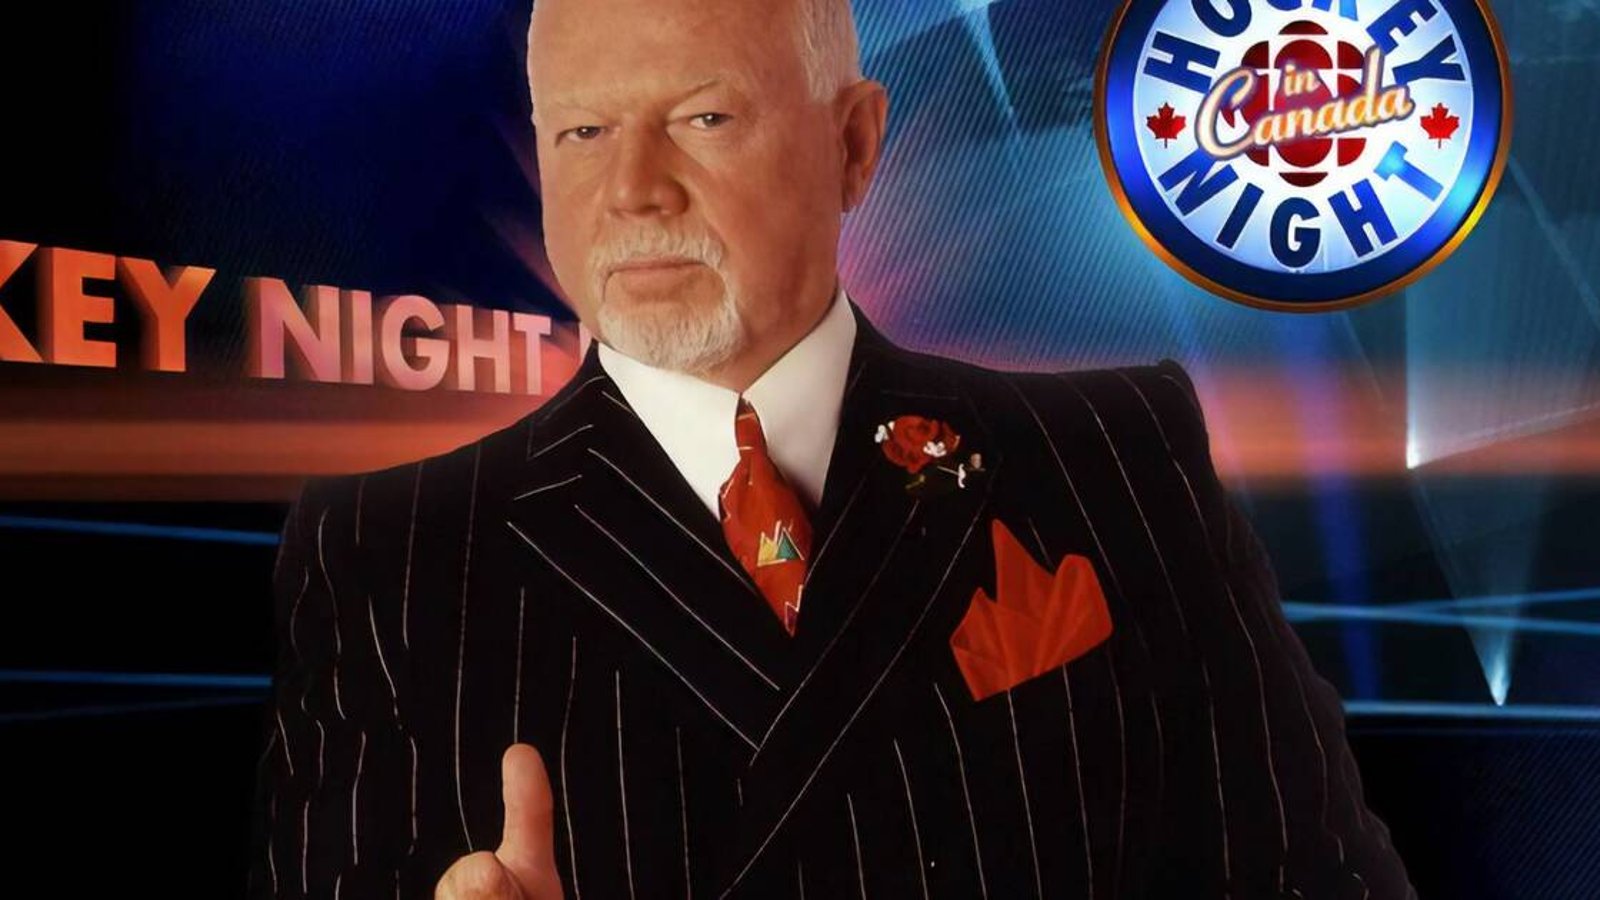 Don Cherry gets no love from Leafs great Rick Vaive